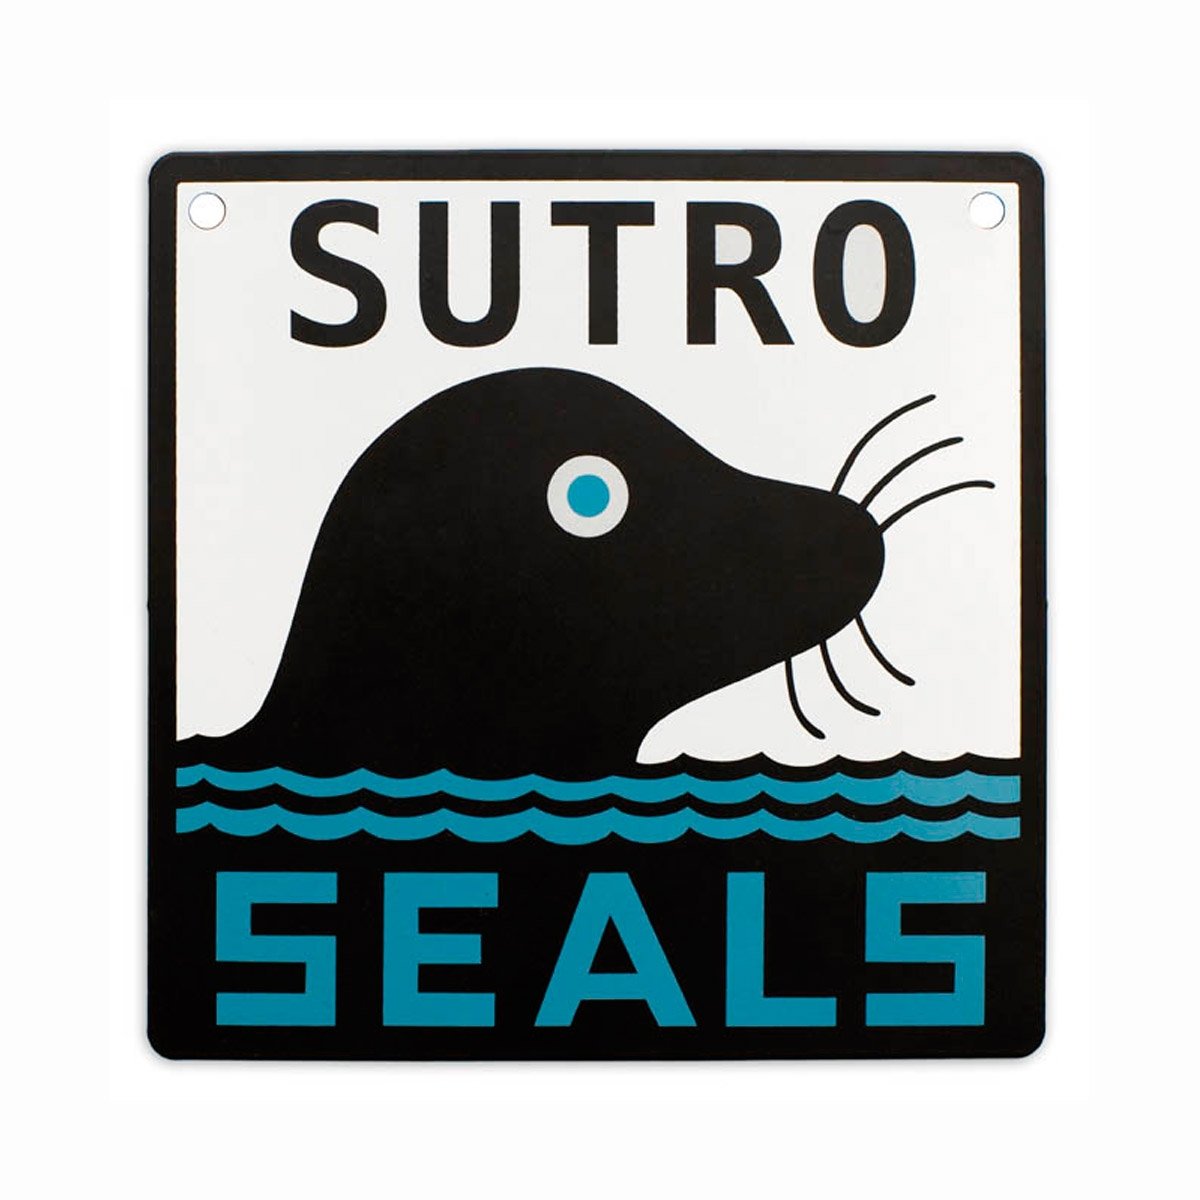 Black, white and teal Sutro Seals decorative metal sign, featuring vintage image of seal in waves from popular Sutro Baths.